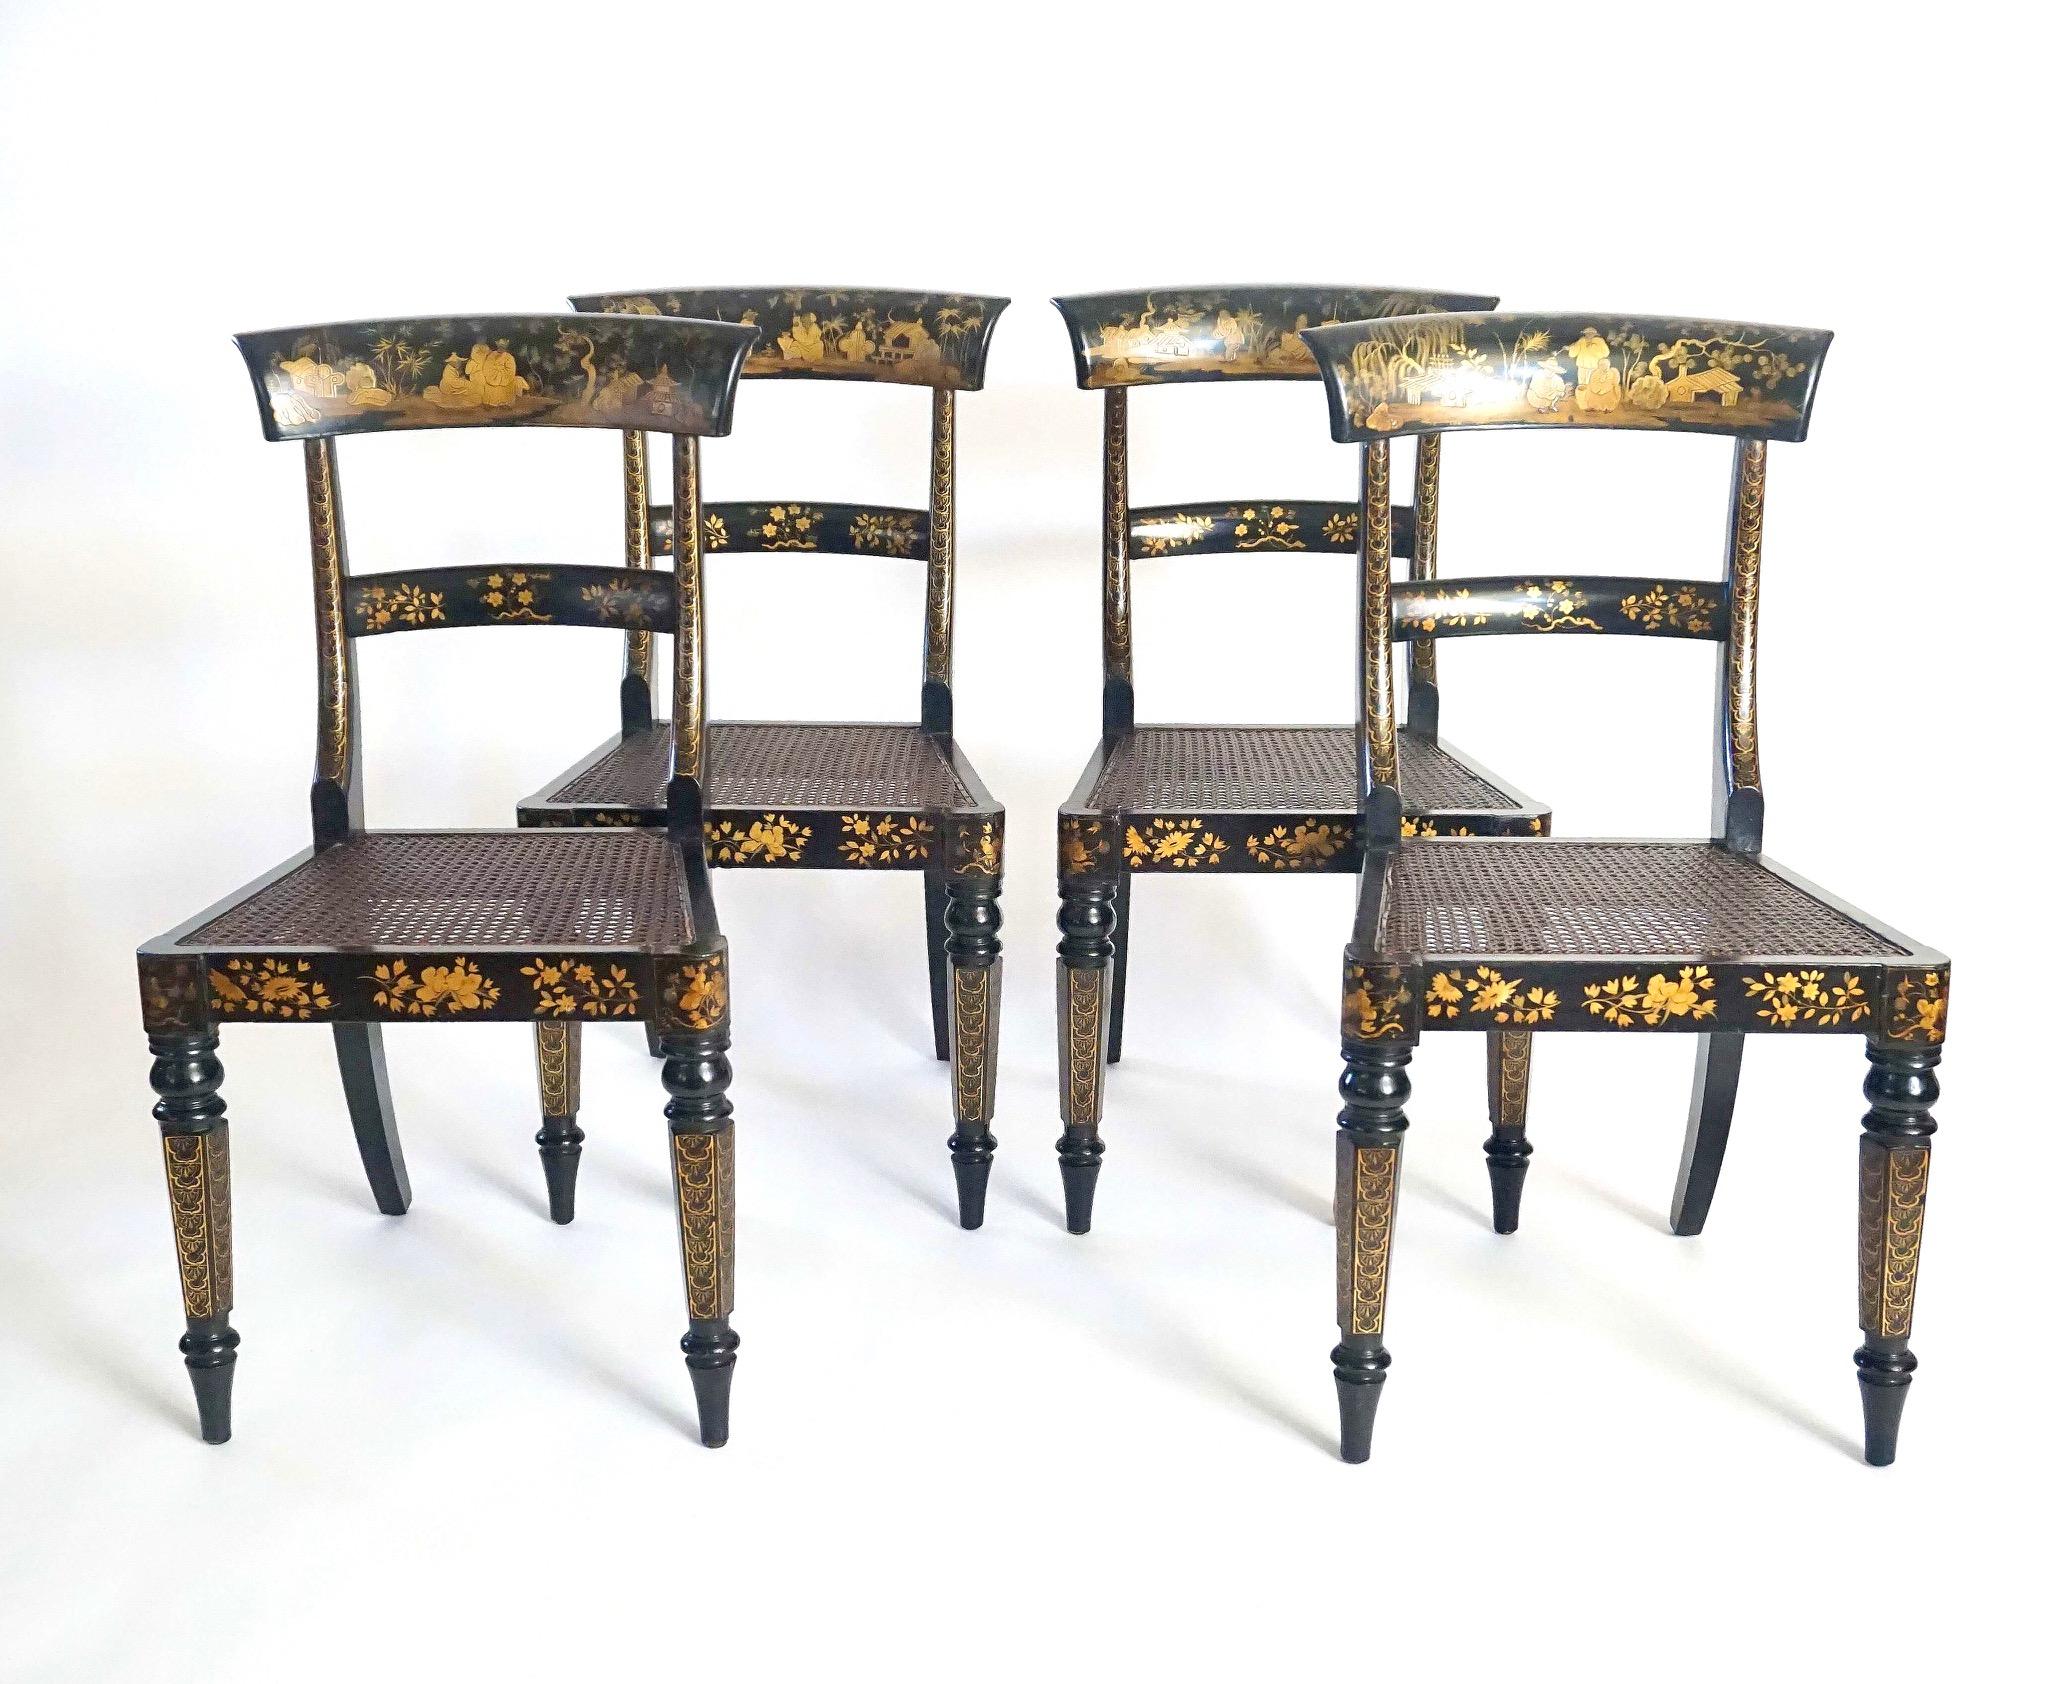 An exceptional and important set of four circa 1835 English William IV, or early Victorian period, side or breakfast chairs of Regency parcel-klismos form having black Japanned frames with allover gilt relief chinoiserie landscape and foliate